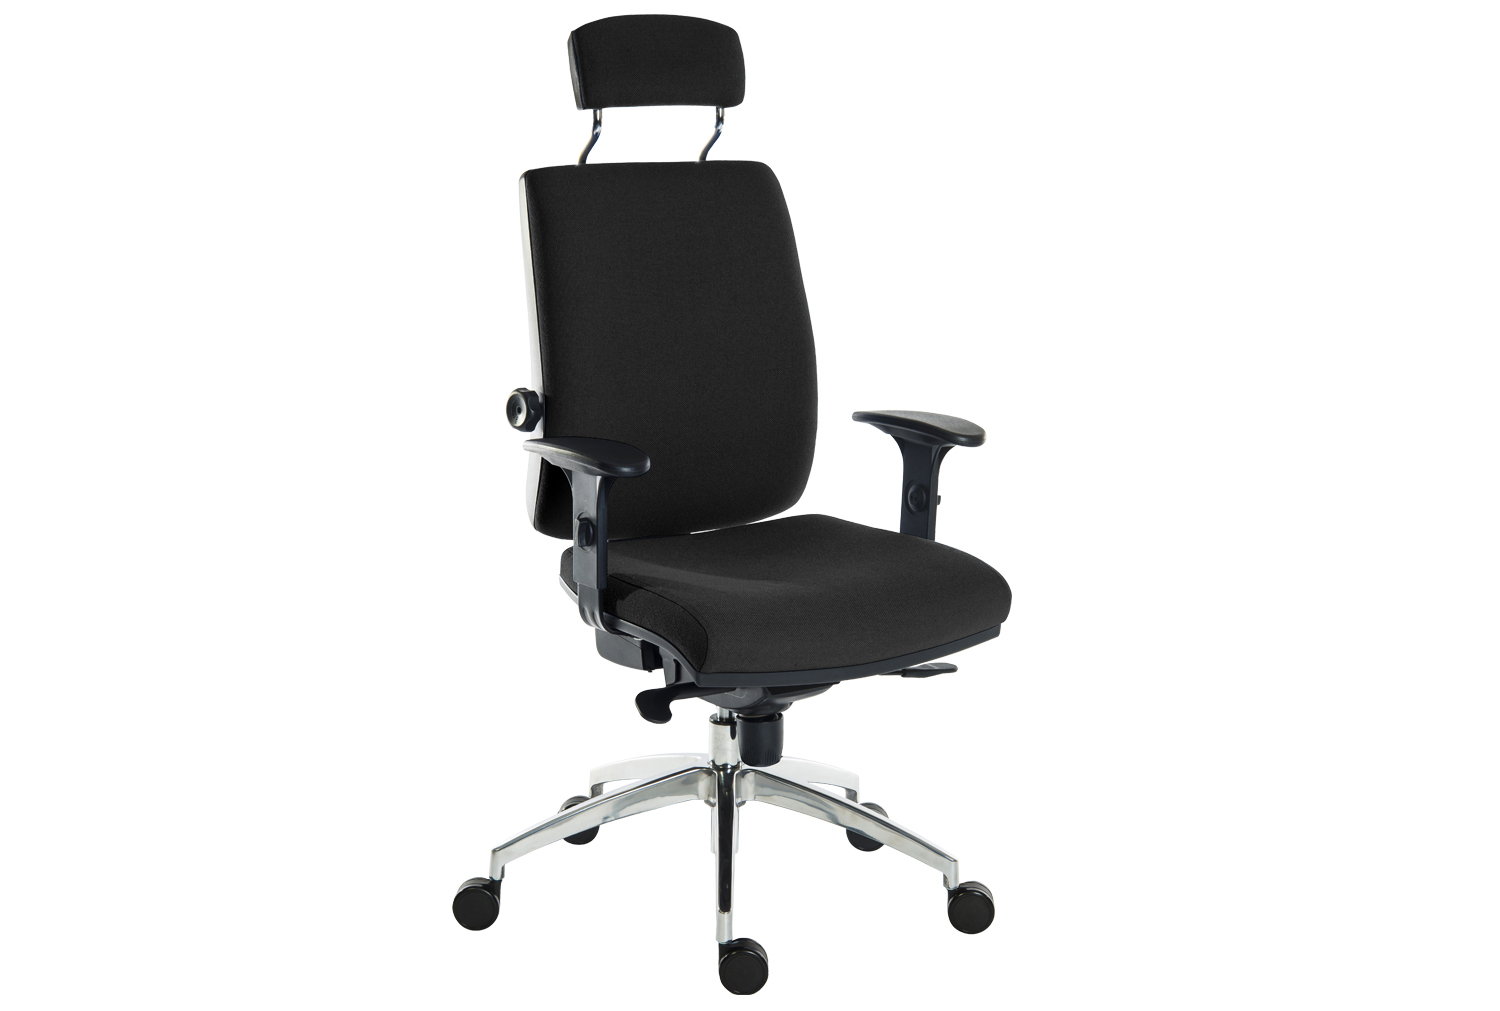 Baron Deluxe 24HR Fabric Ergonomic Office ArmOffice Chair With Headrest (Chrome Frame), Deluxe Adjustable Arms, Black